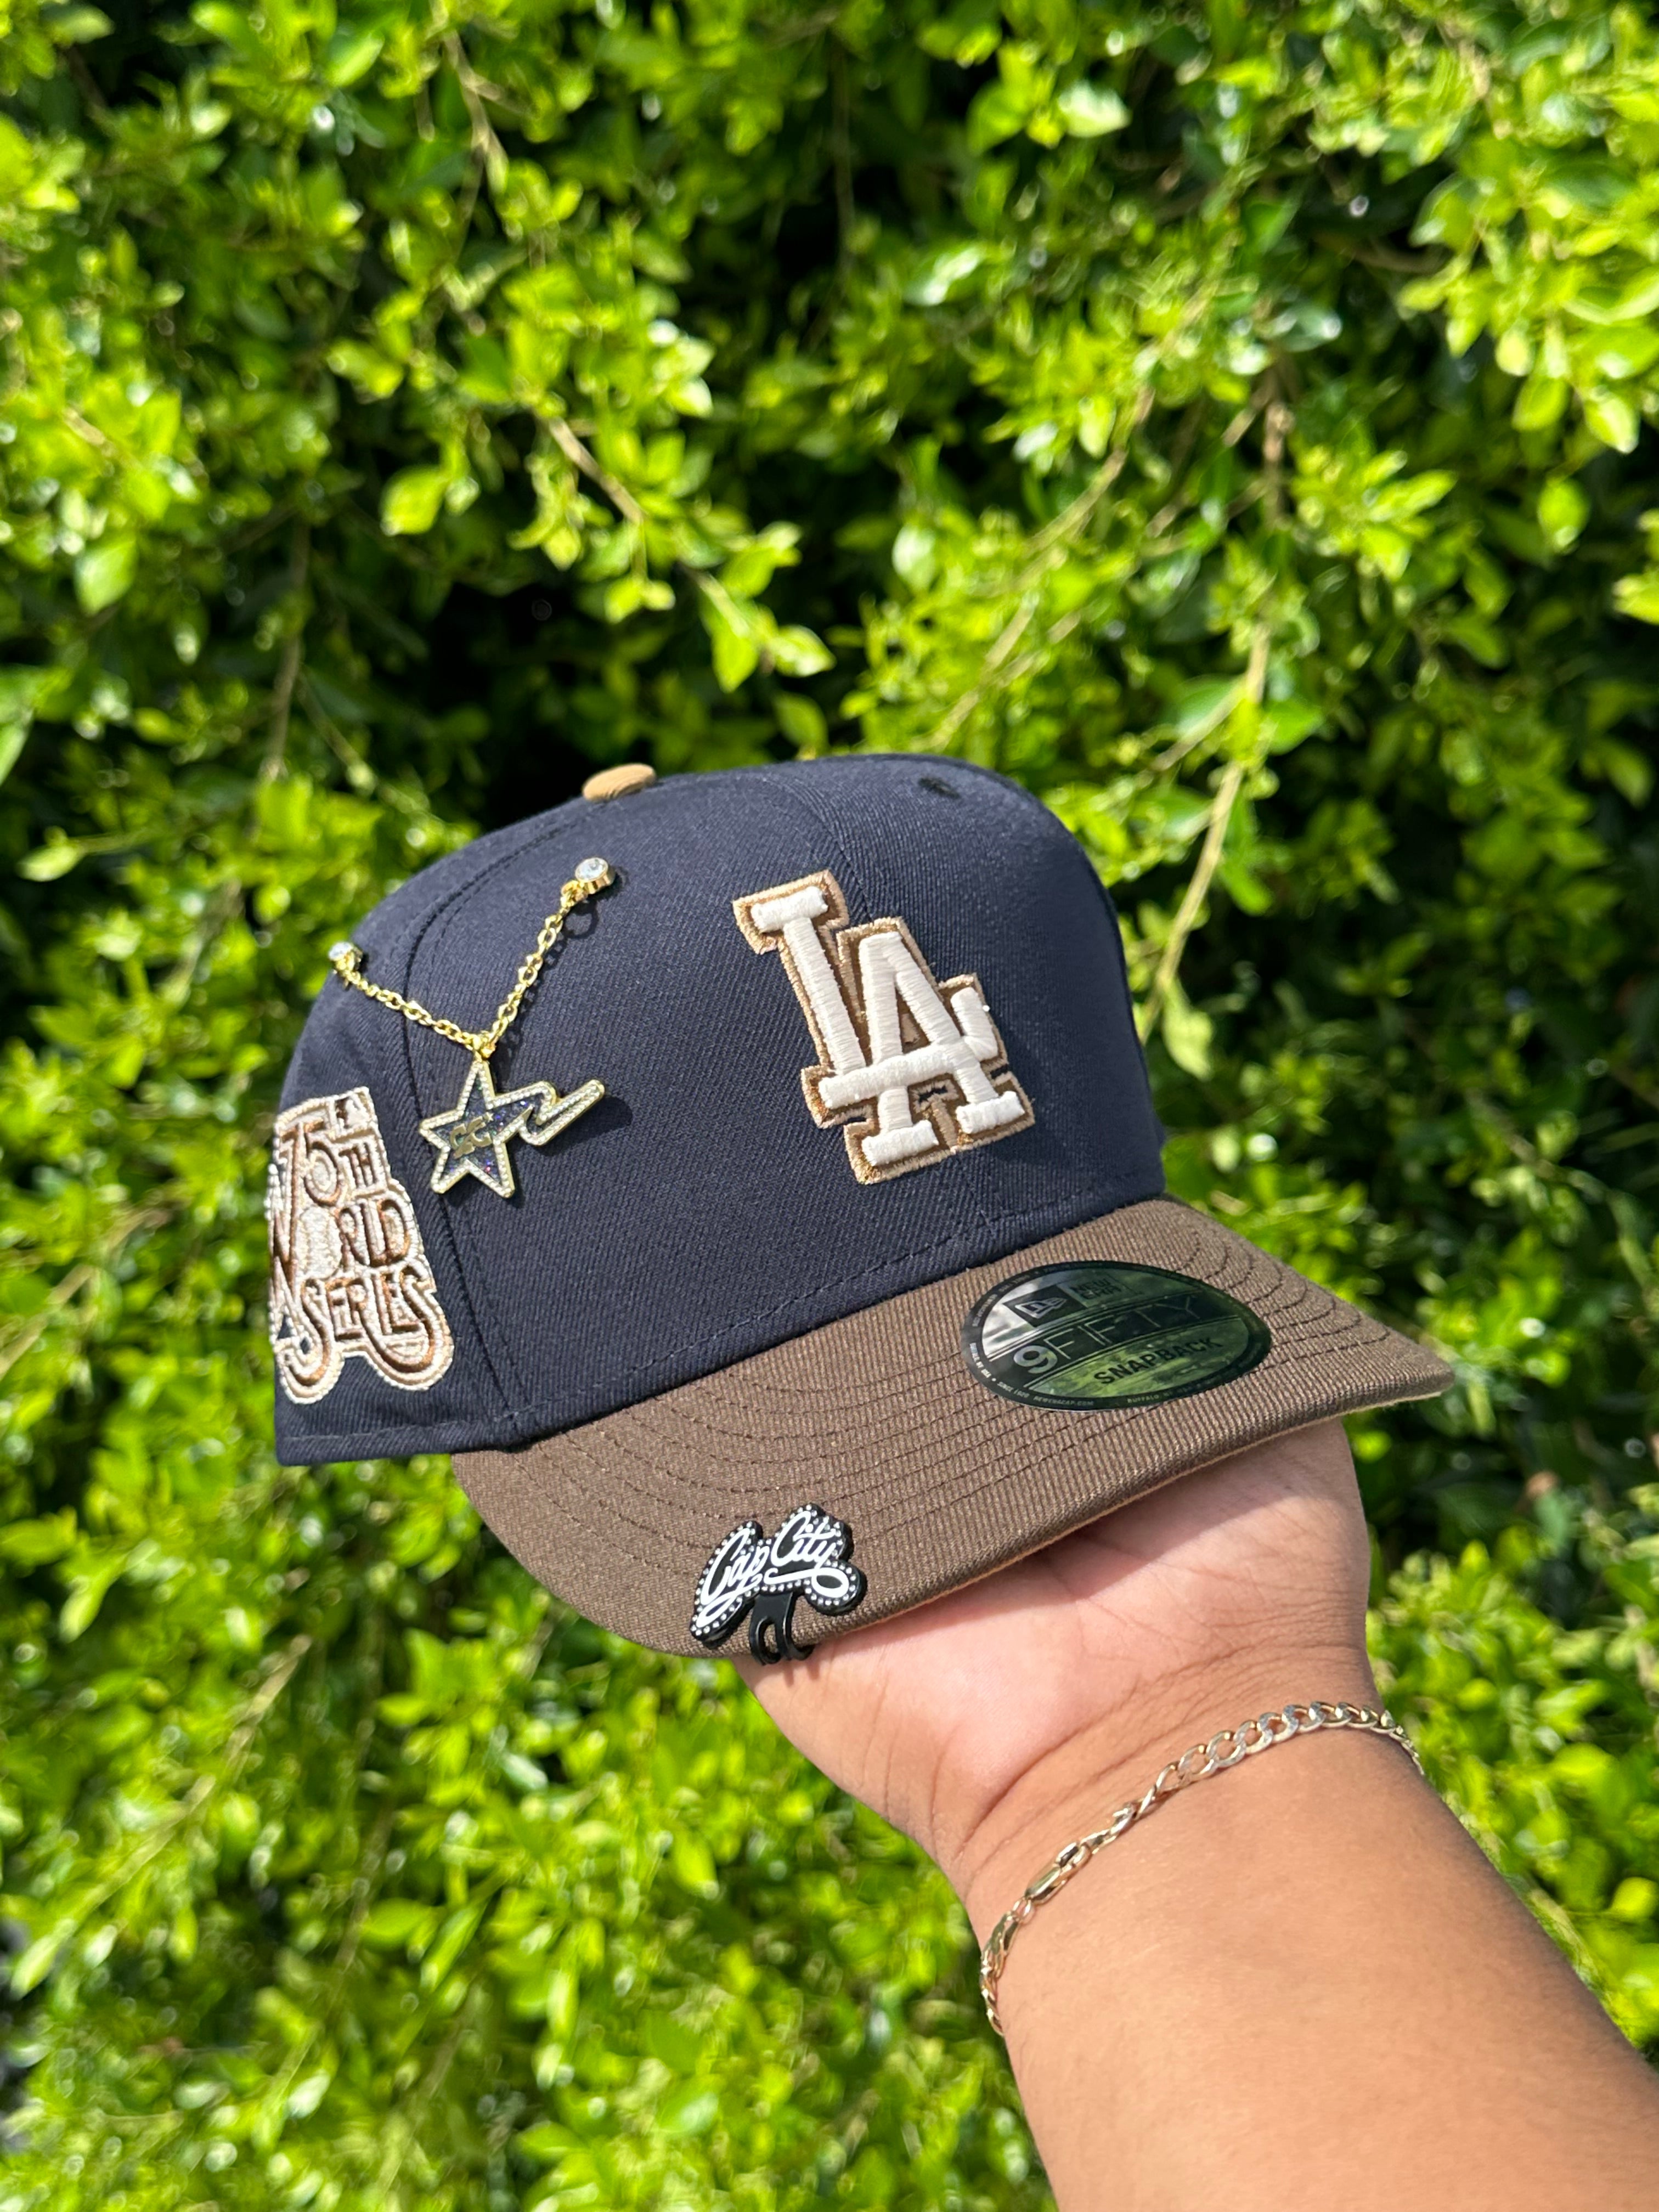 NEW ERA EXCLUSIVE 9FIFTY NAVY/WALNUT LOS ANGELES DODGERS SNAPBACK W/ 75TH WORLD SERIES PATCH